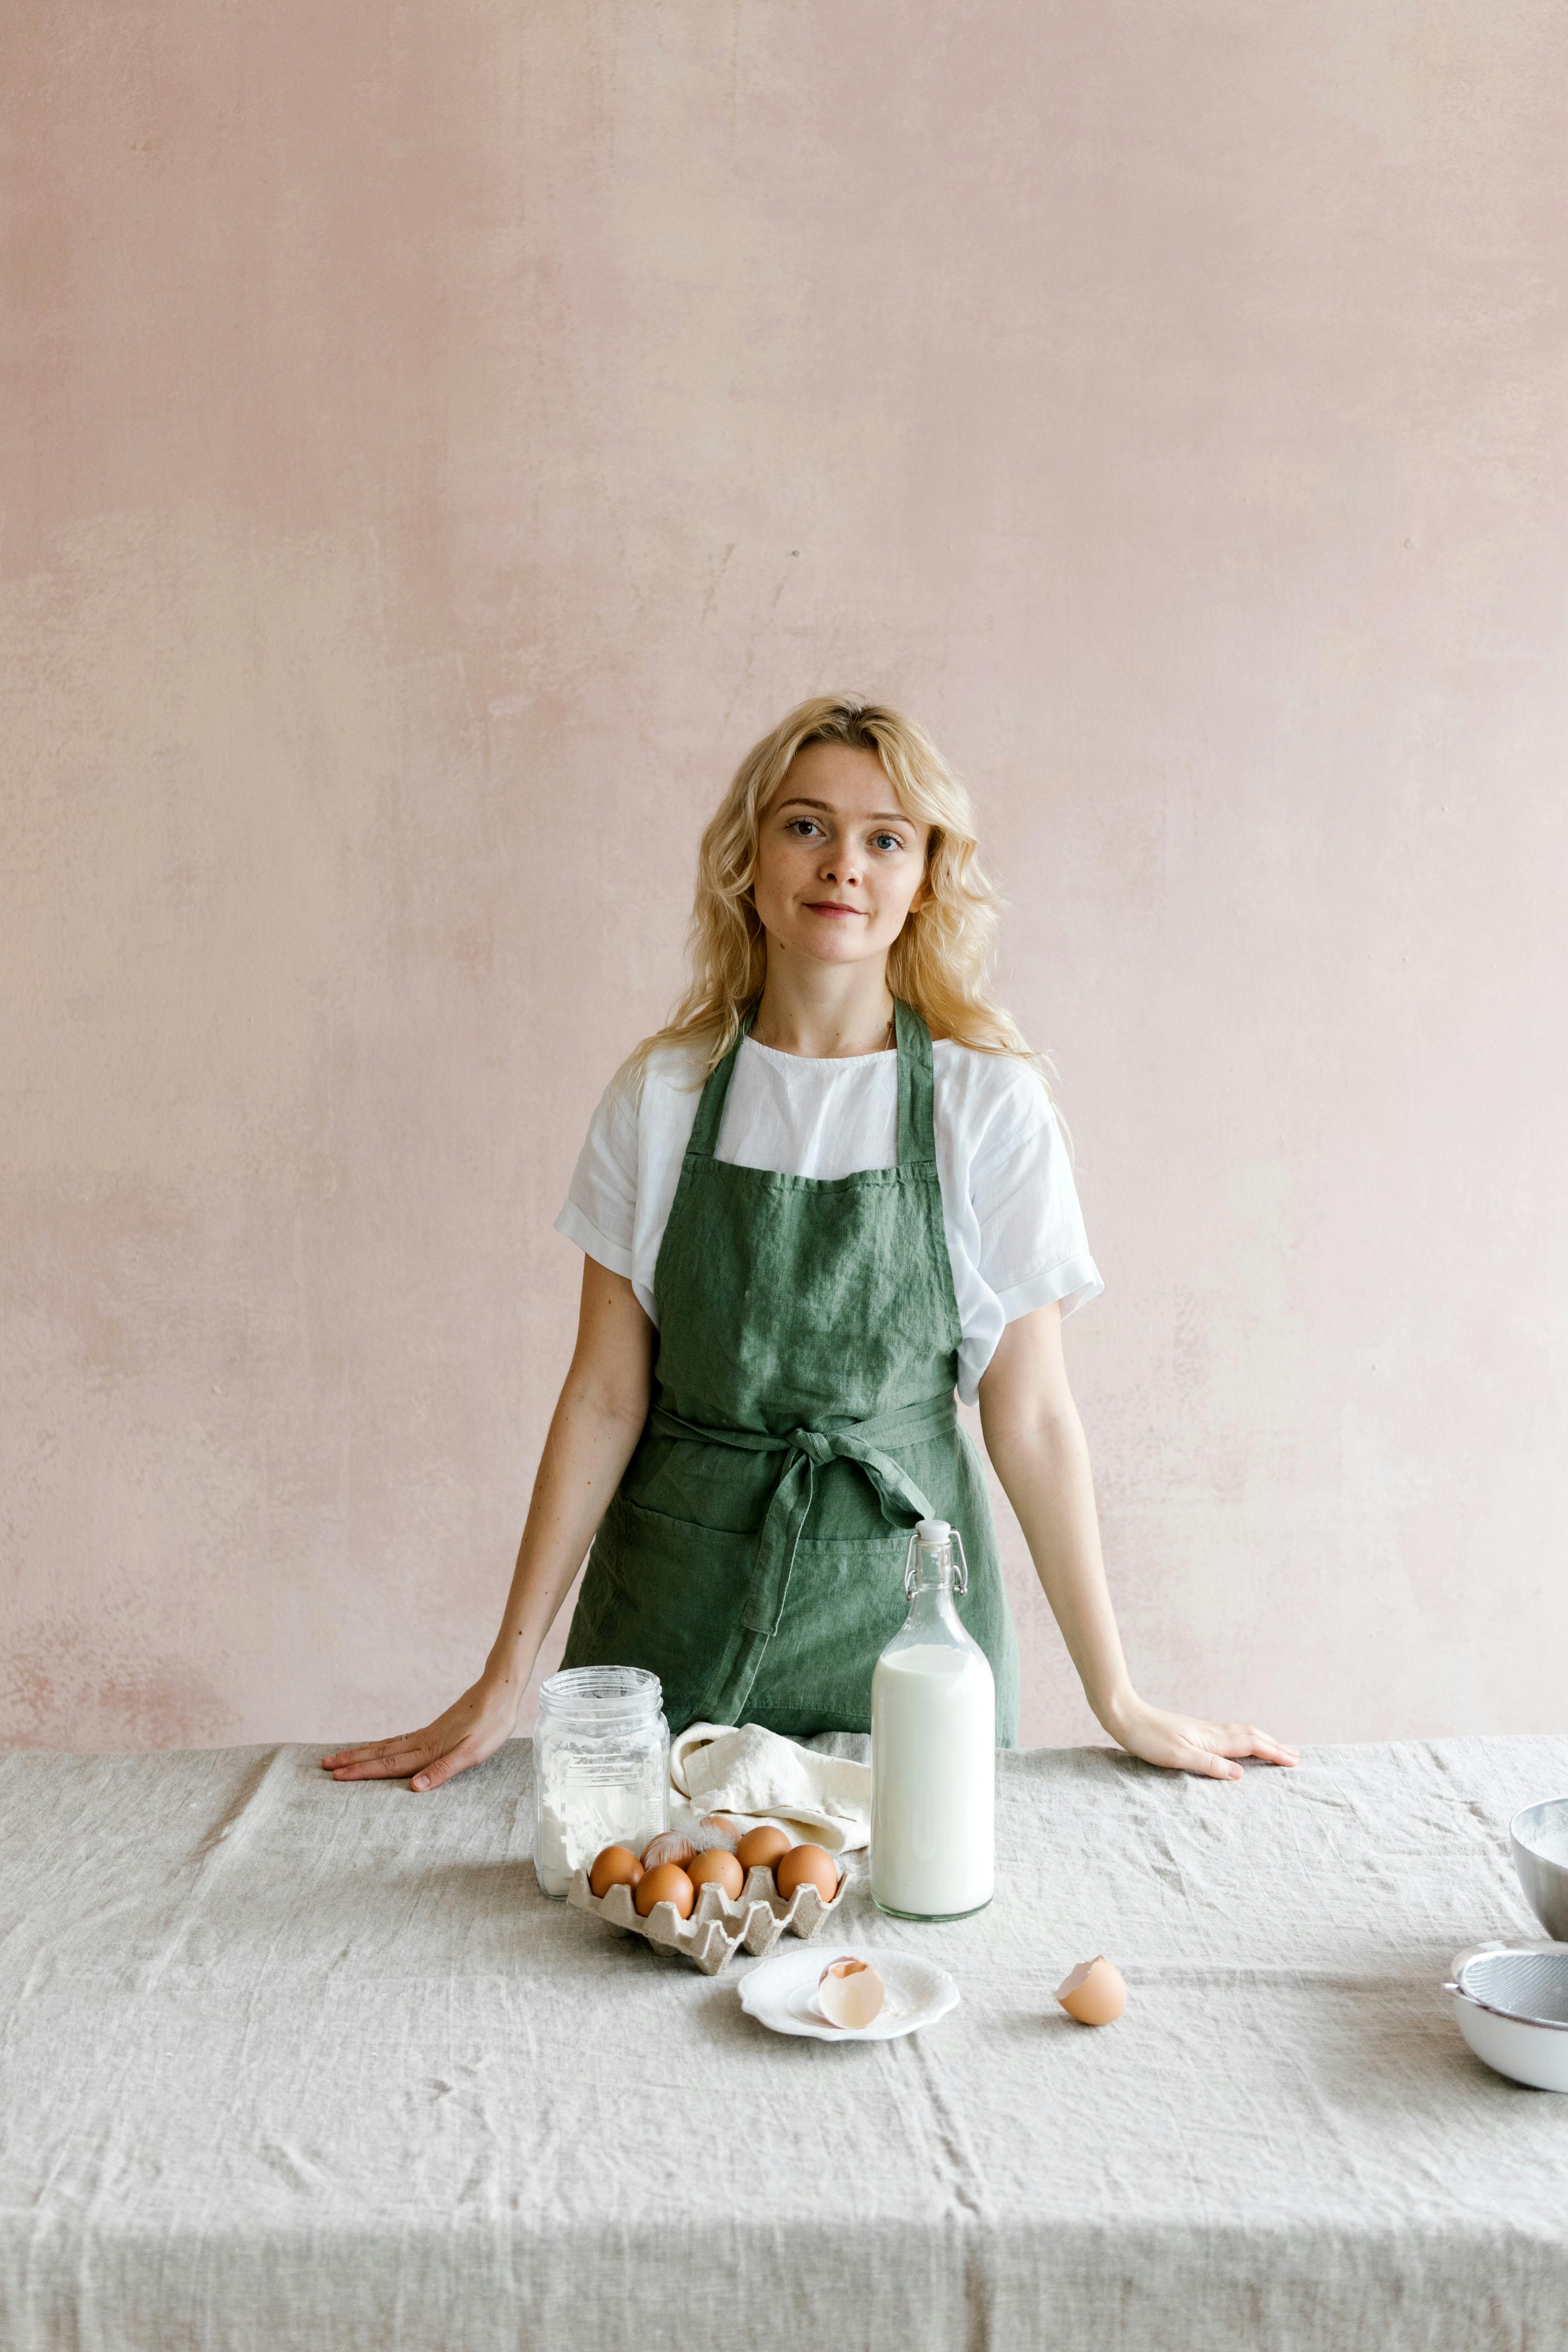 Woman in apron stands at the table cooking | Source: Pexels